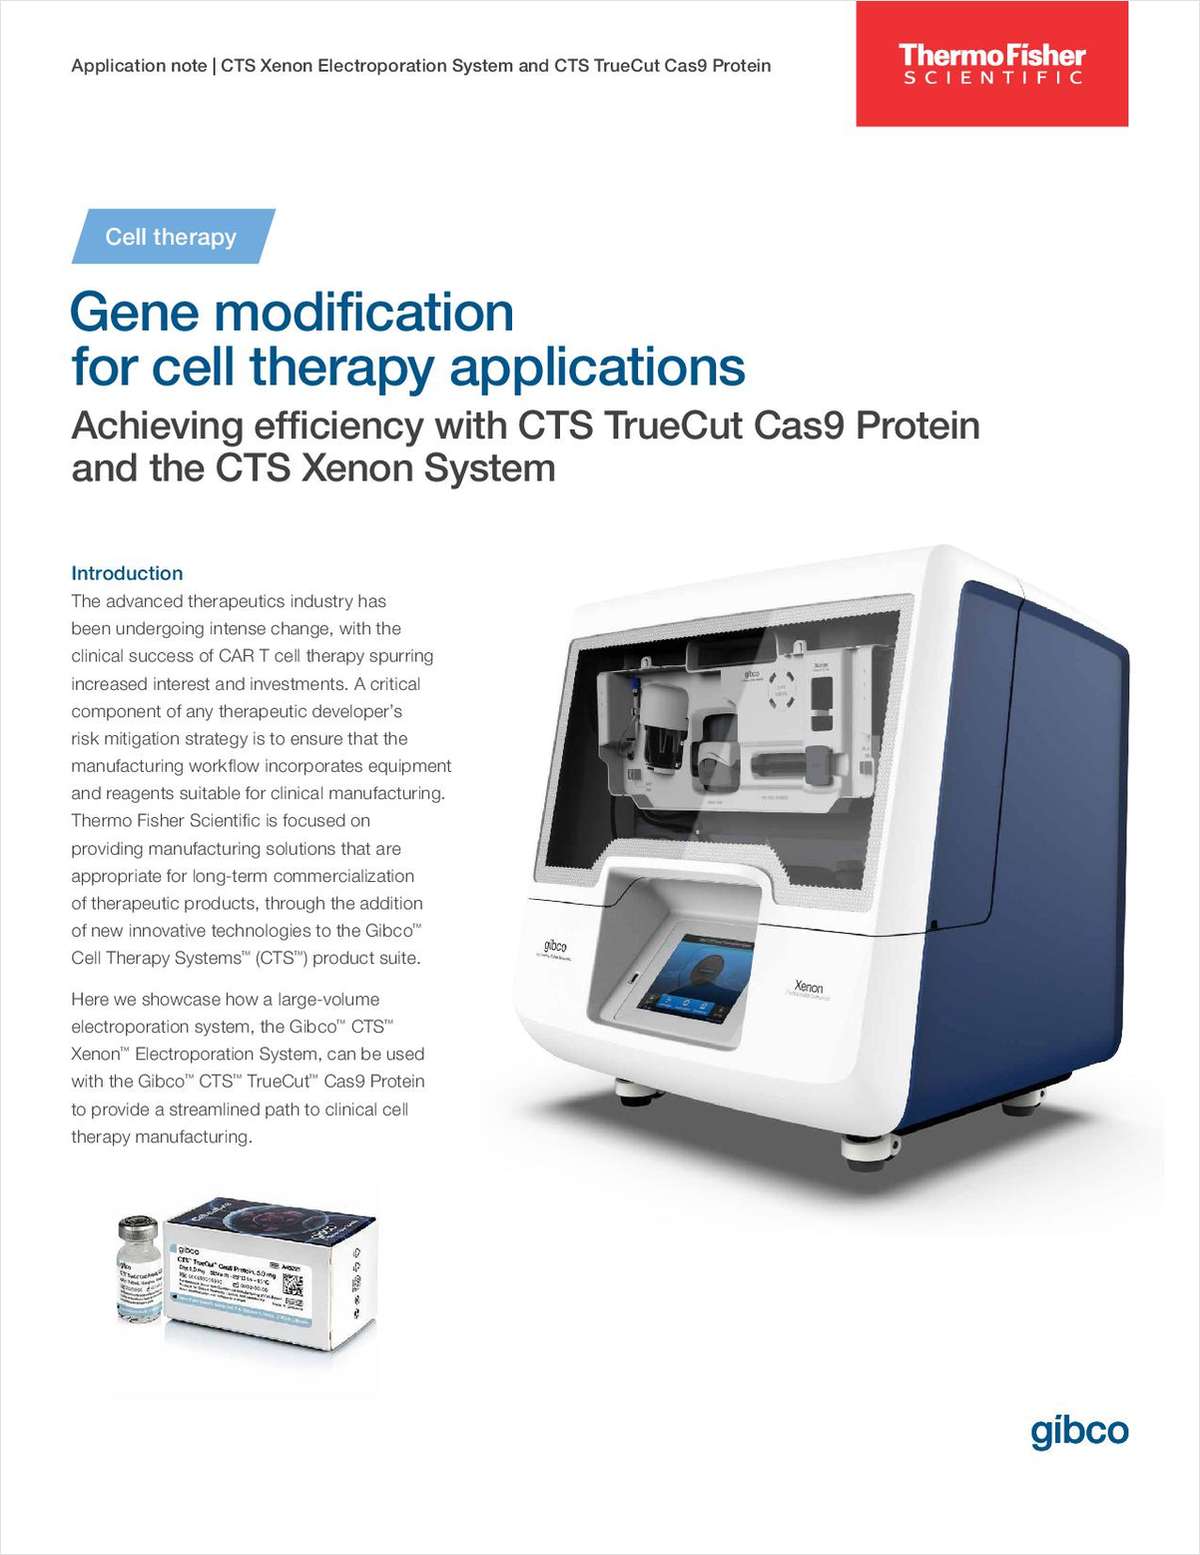 Gene Modification for Cell Therapy Applications